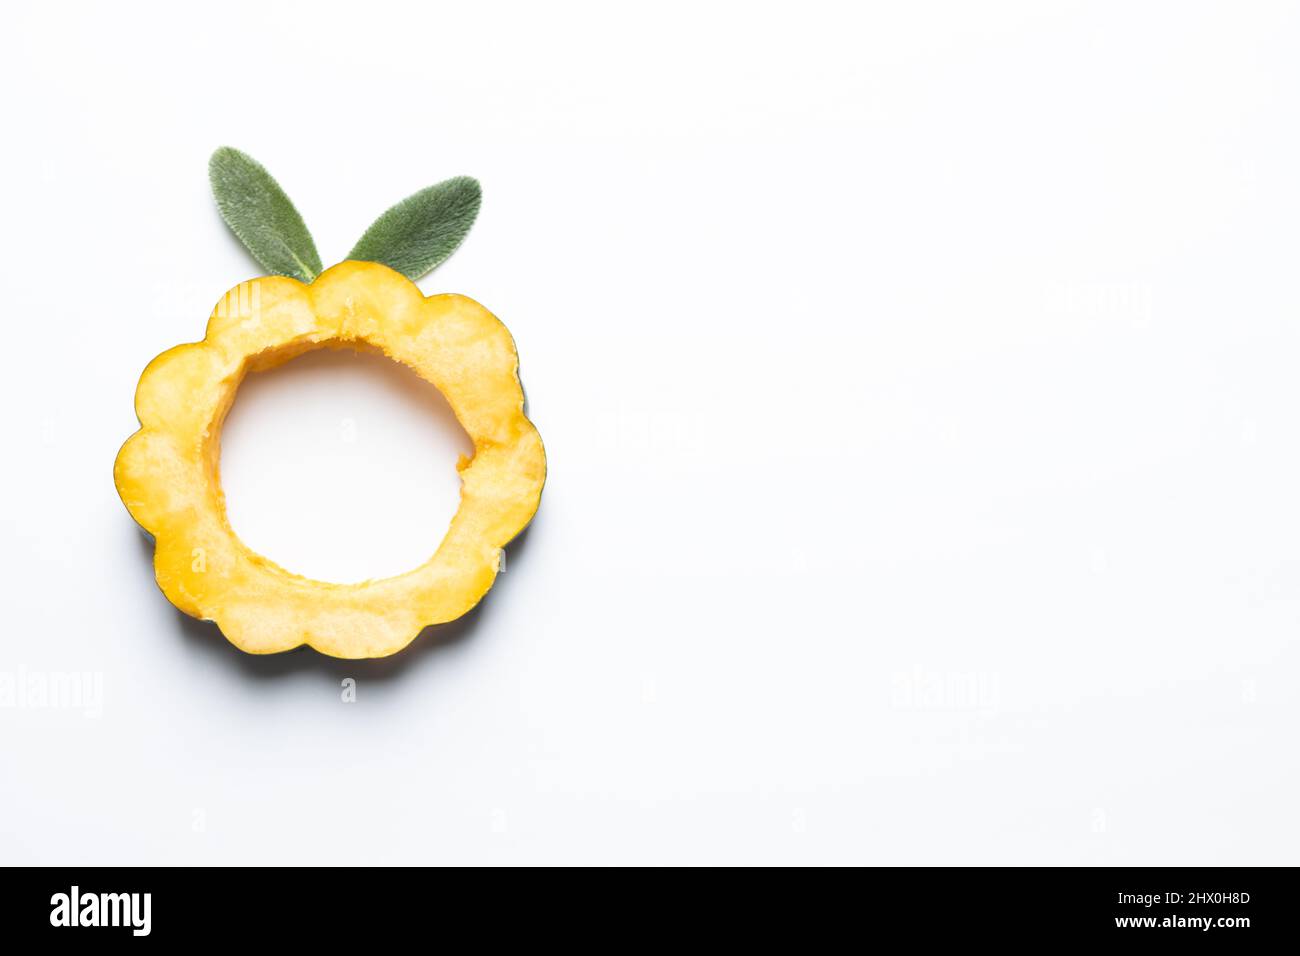 Sliced acorn squash with lambs ear leaves isolated on a white background. Stock Photo